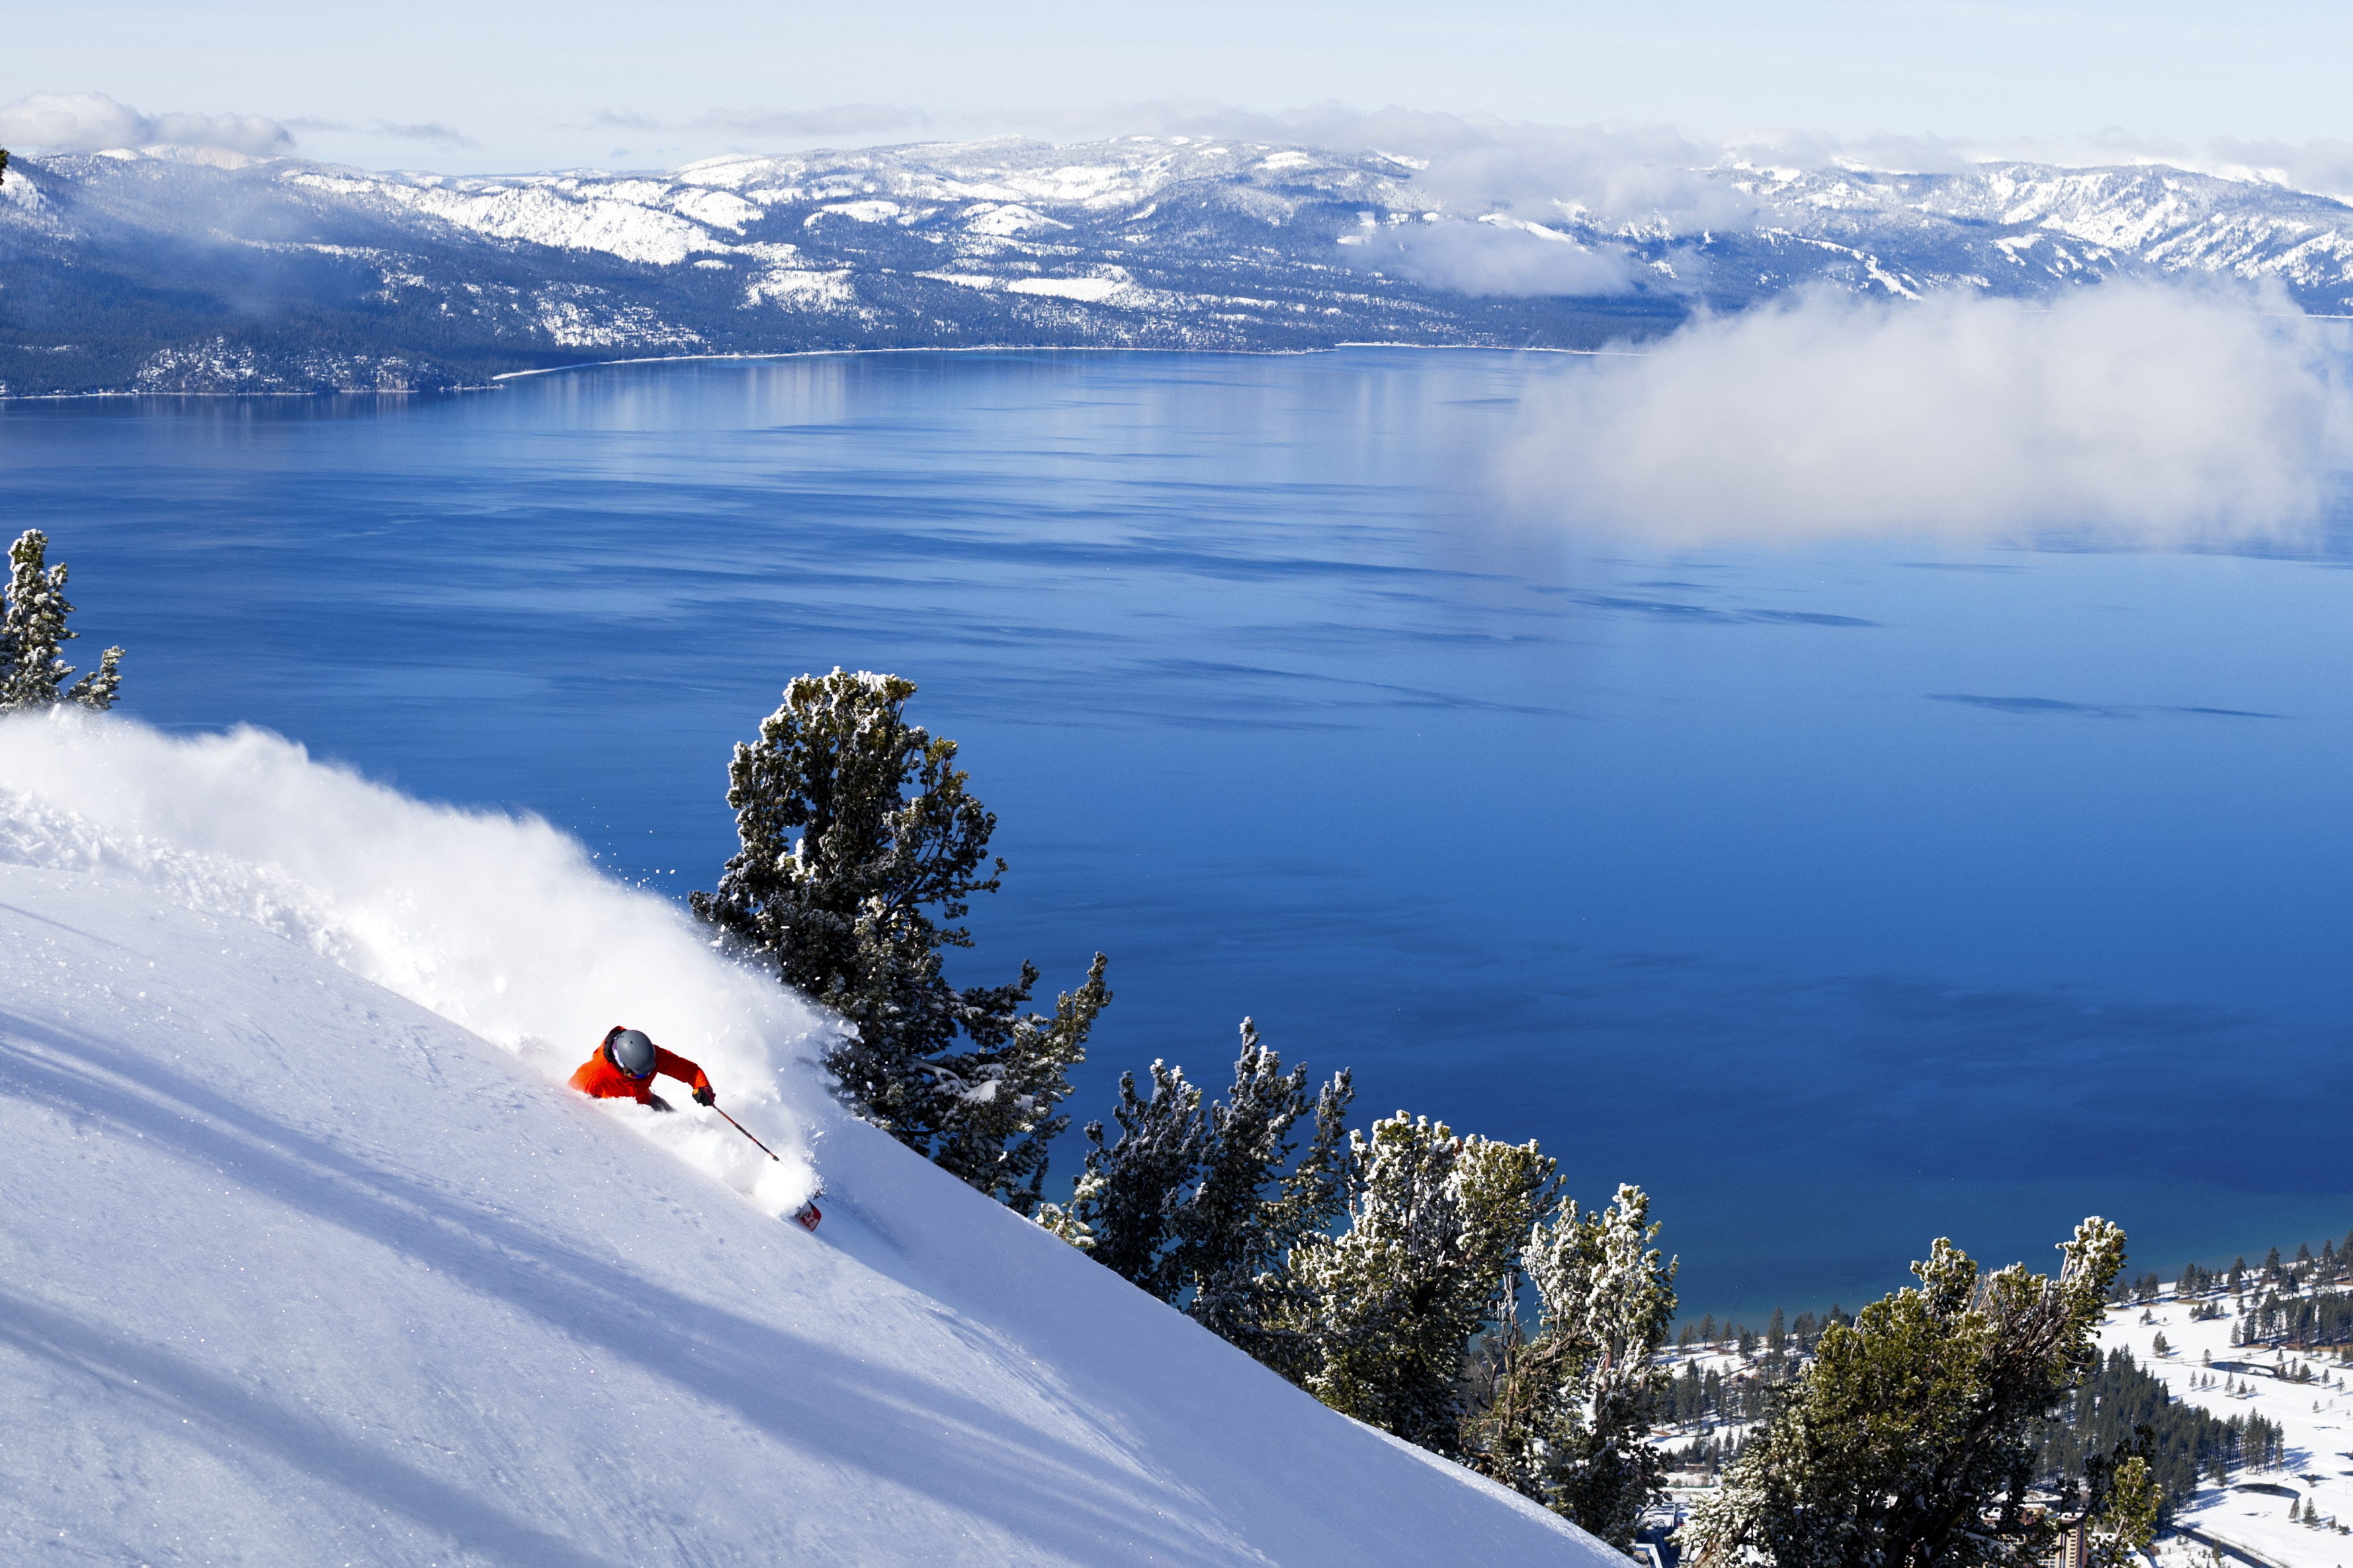 The 10 Best Ski and Snowboard Destinations for Your Money